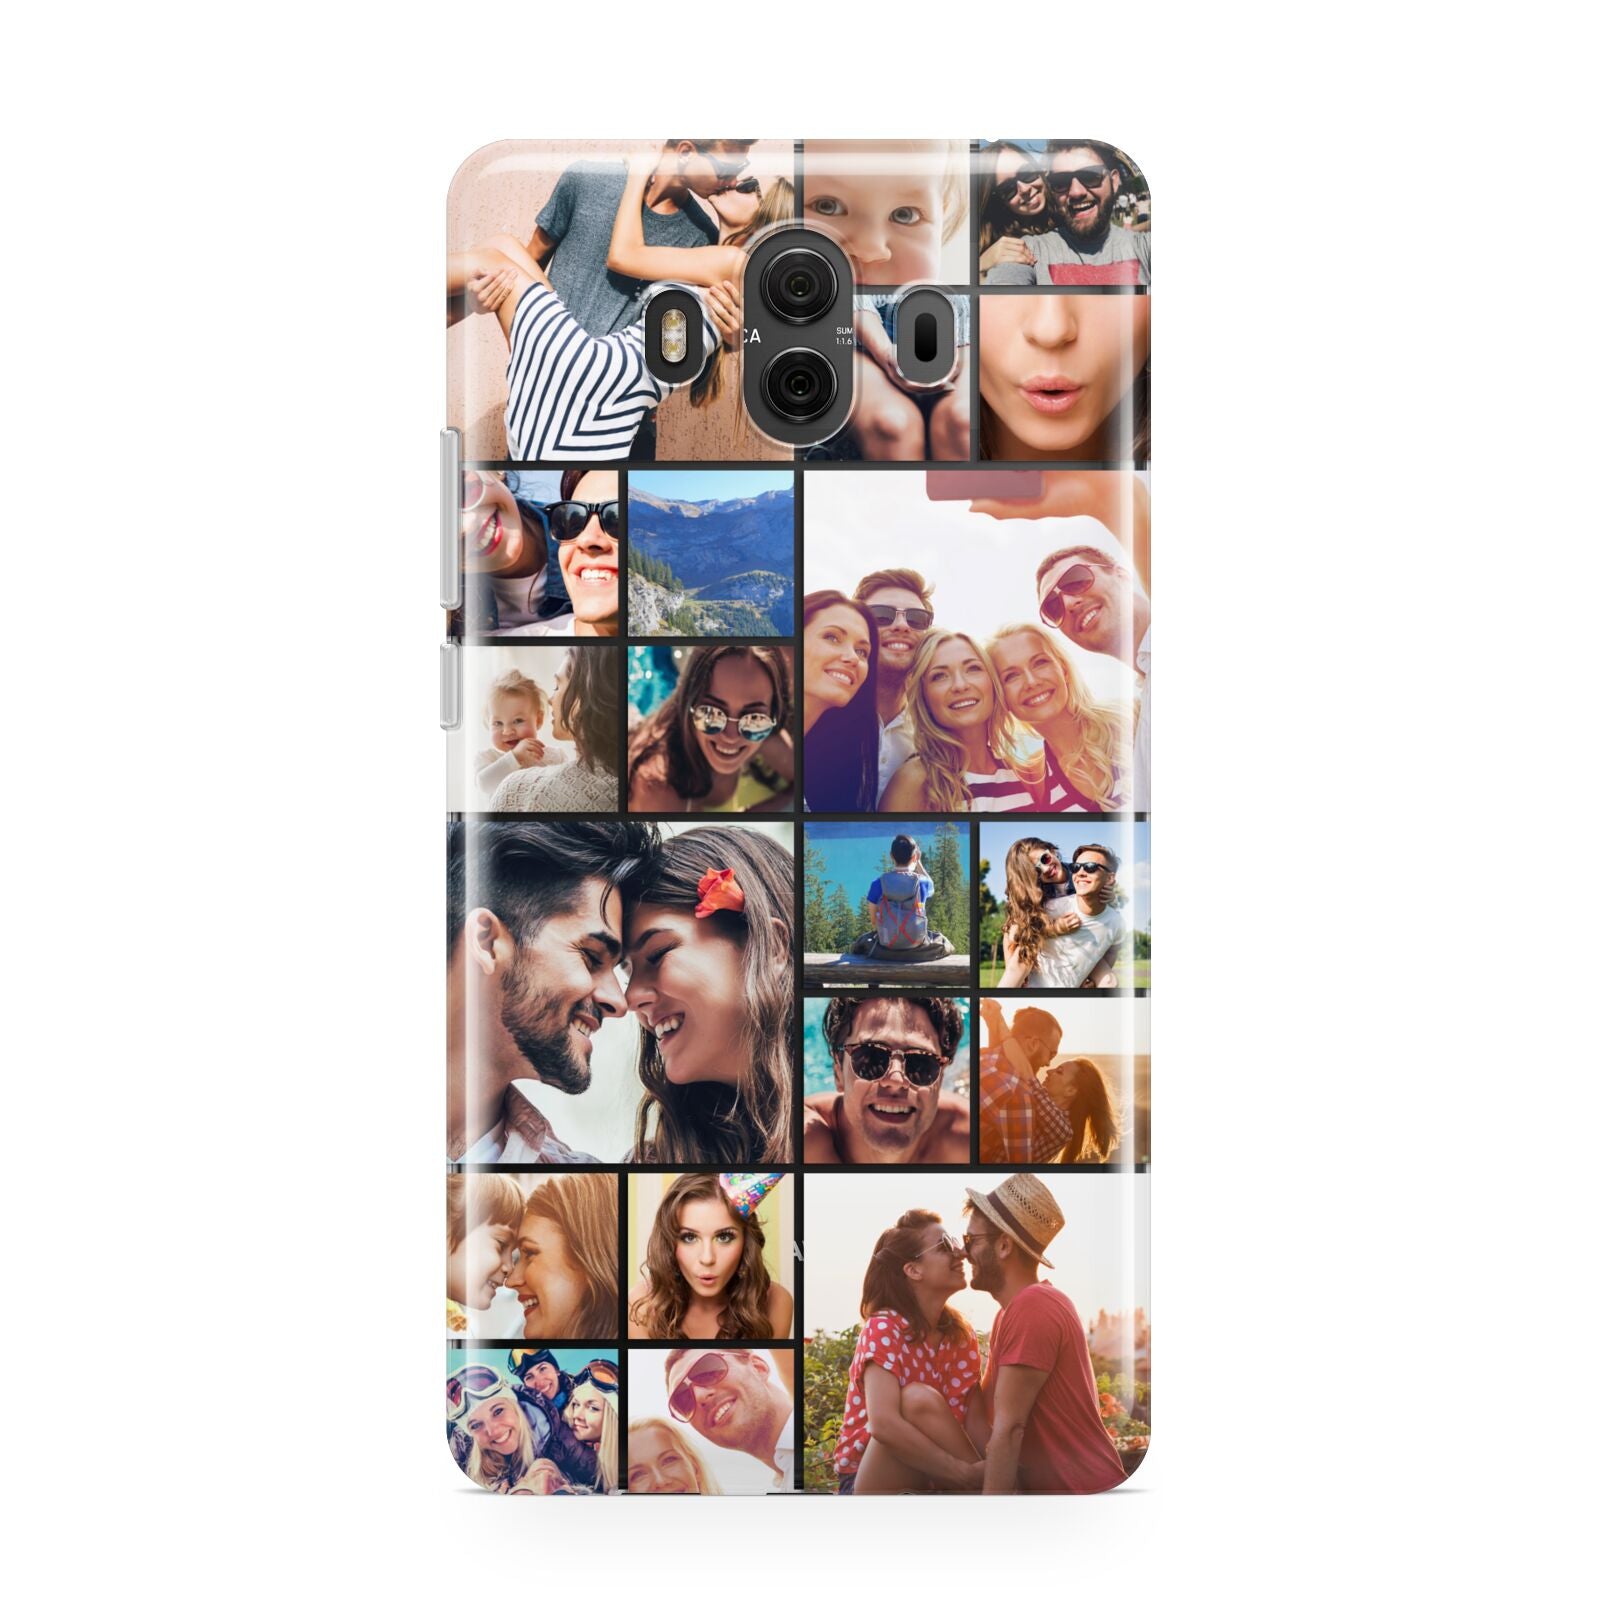 Photo Grid Huawei Mate 10 Protective Phone Case